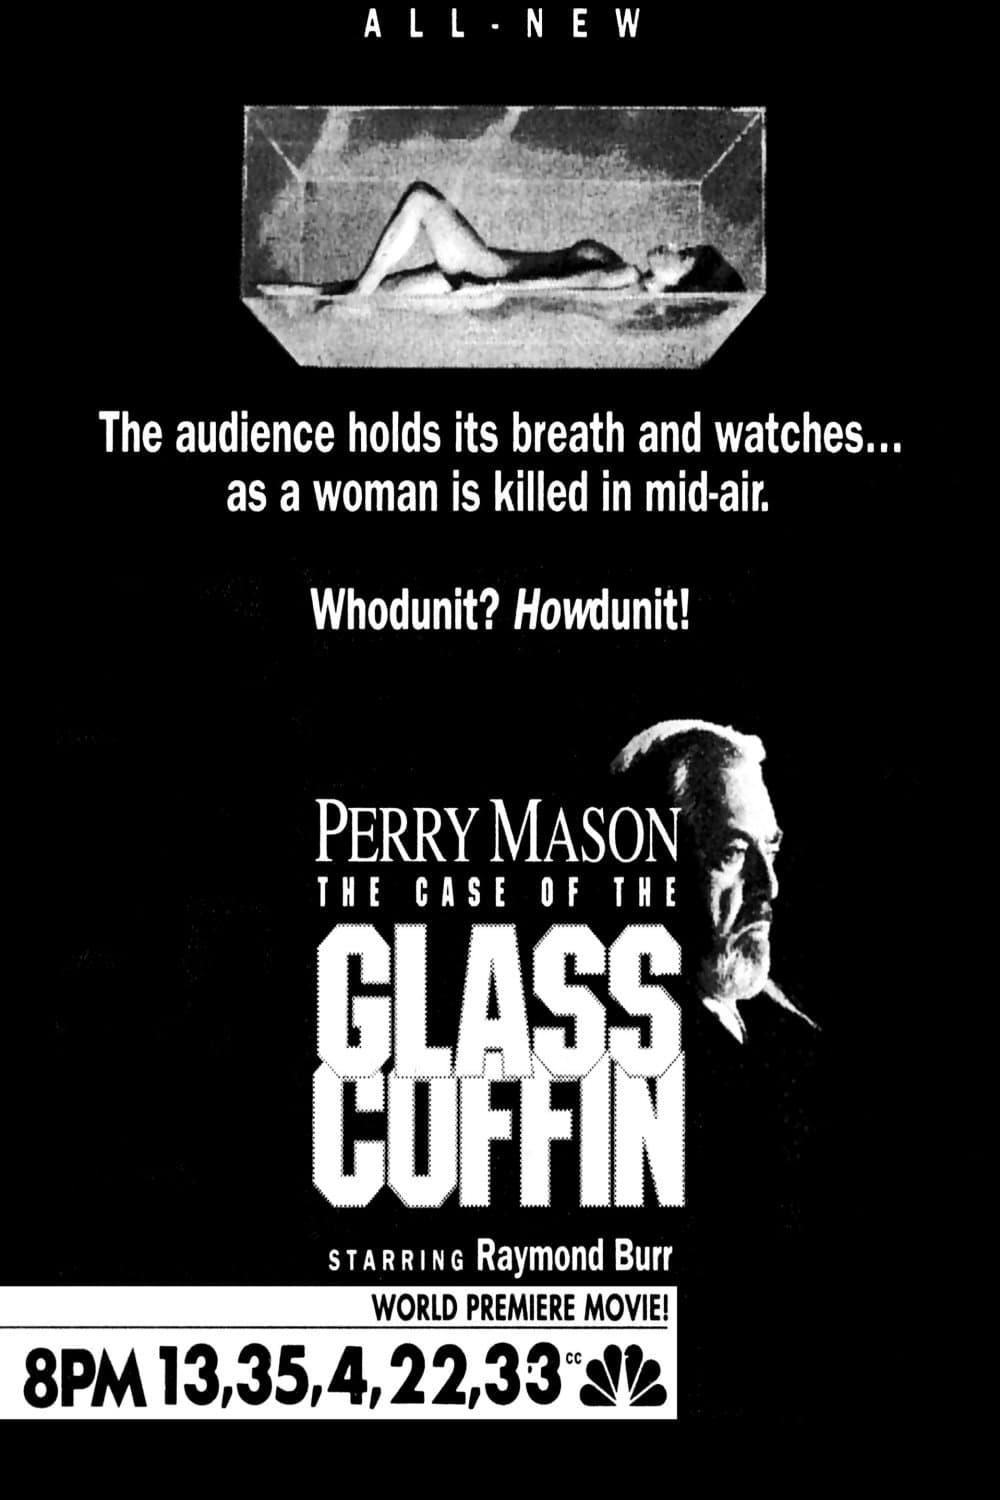 Perry Mason: The Case of the Glass Coffin poster